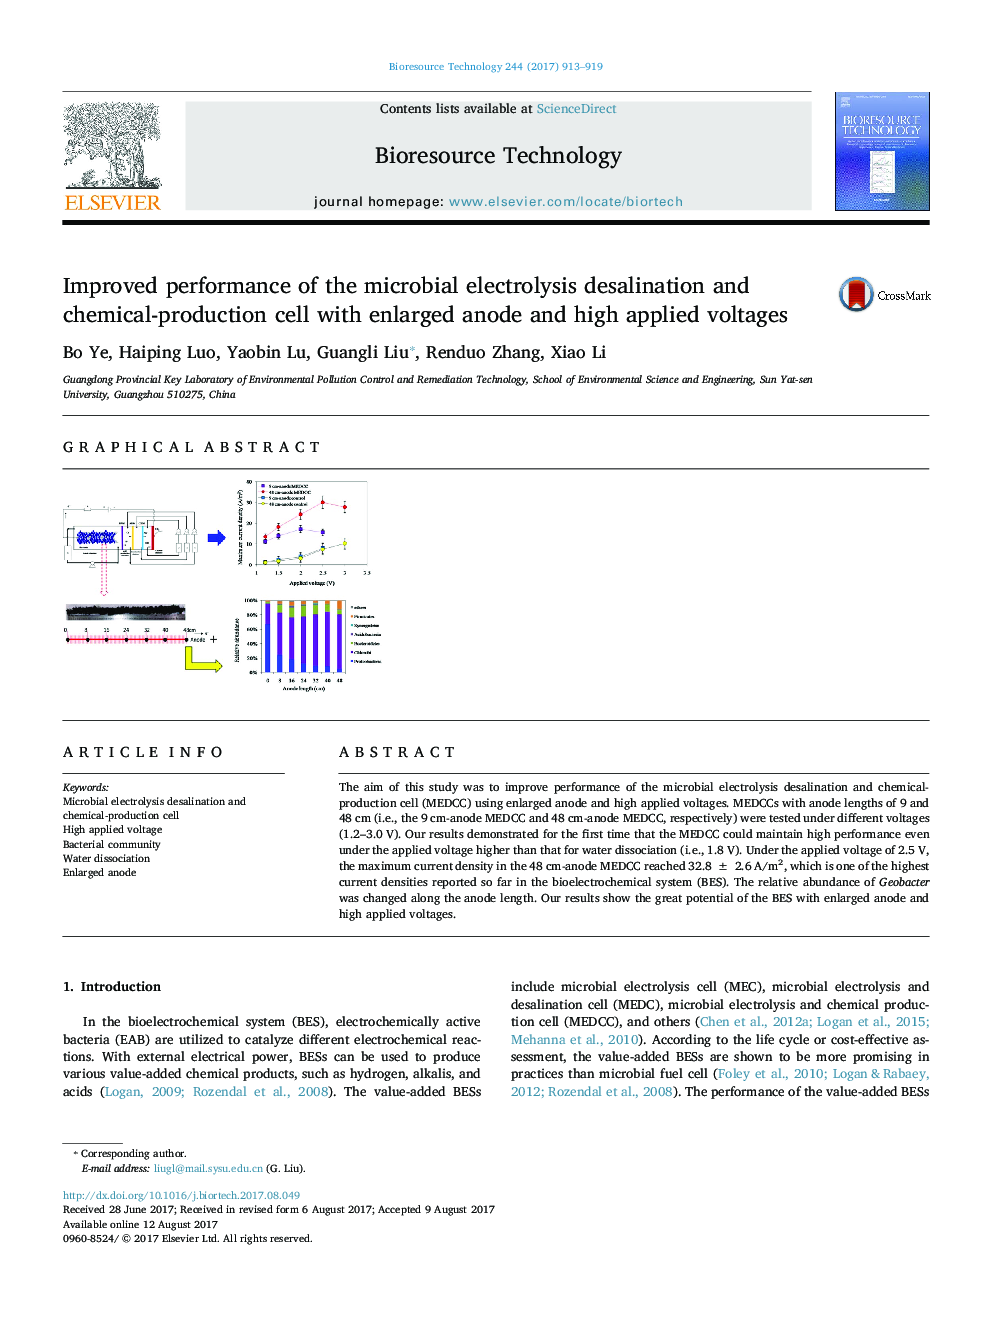 Improved performance of the microbial electrolysis desalination and chemical-production cell with enlarged anode and high applied voltages